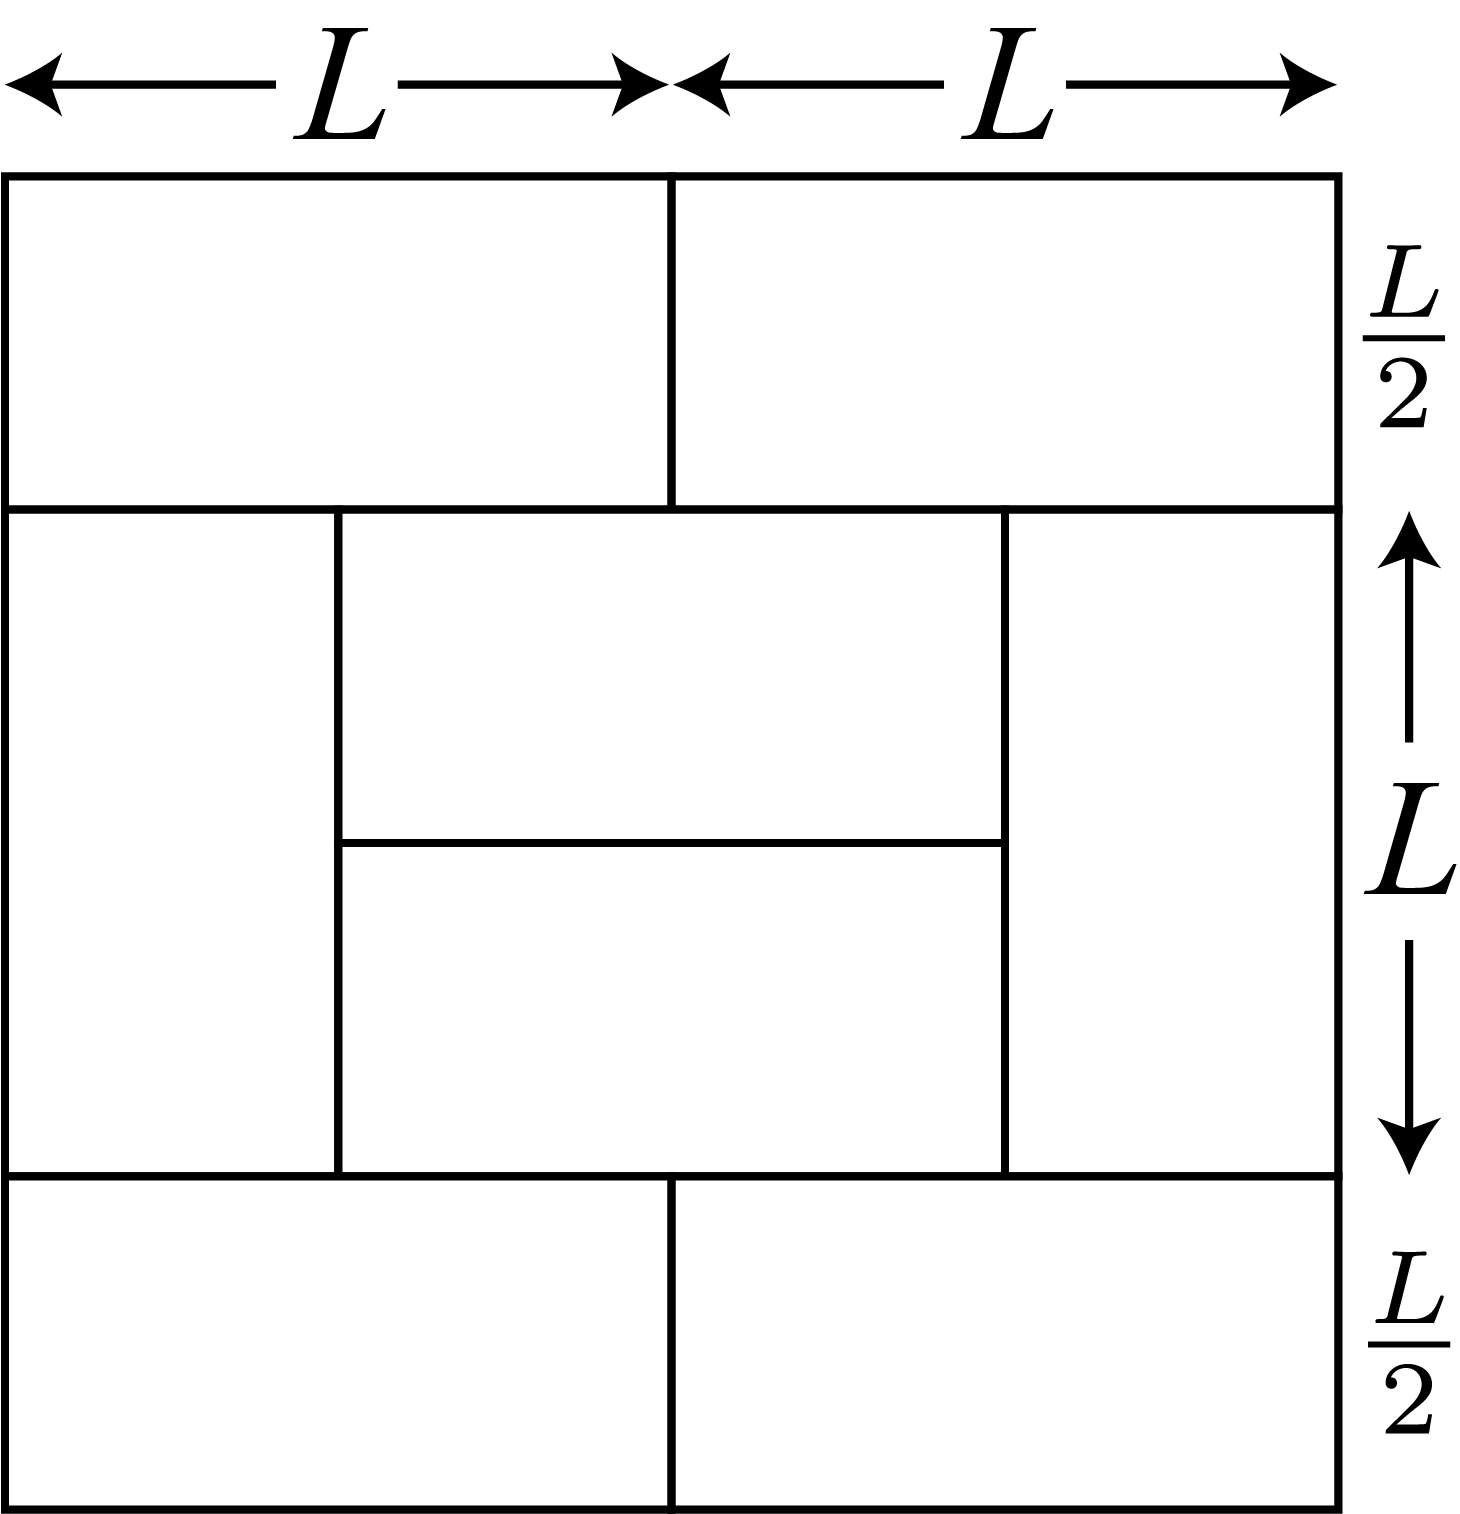 A horizontal side of the larger rectangle is made up of two segments of length L. A vertical side of the larger rectangle is made up of a segment of length L over 2, a segment of length L, and another segment of length L over 2.